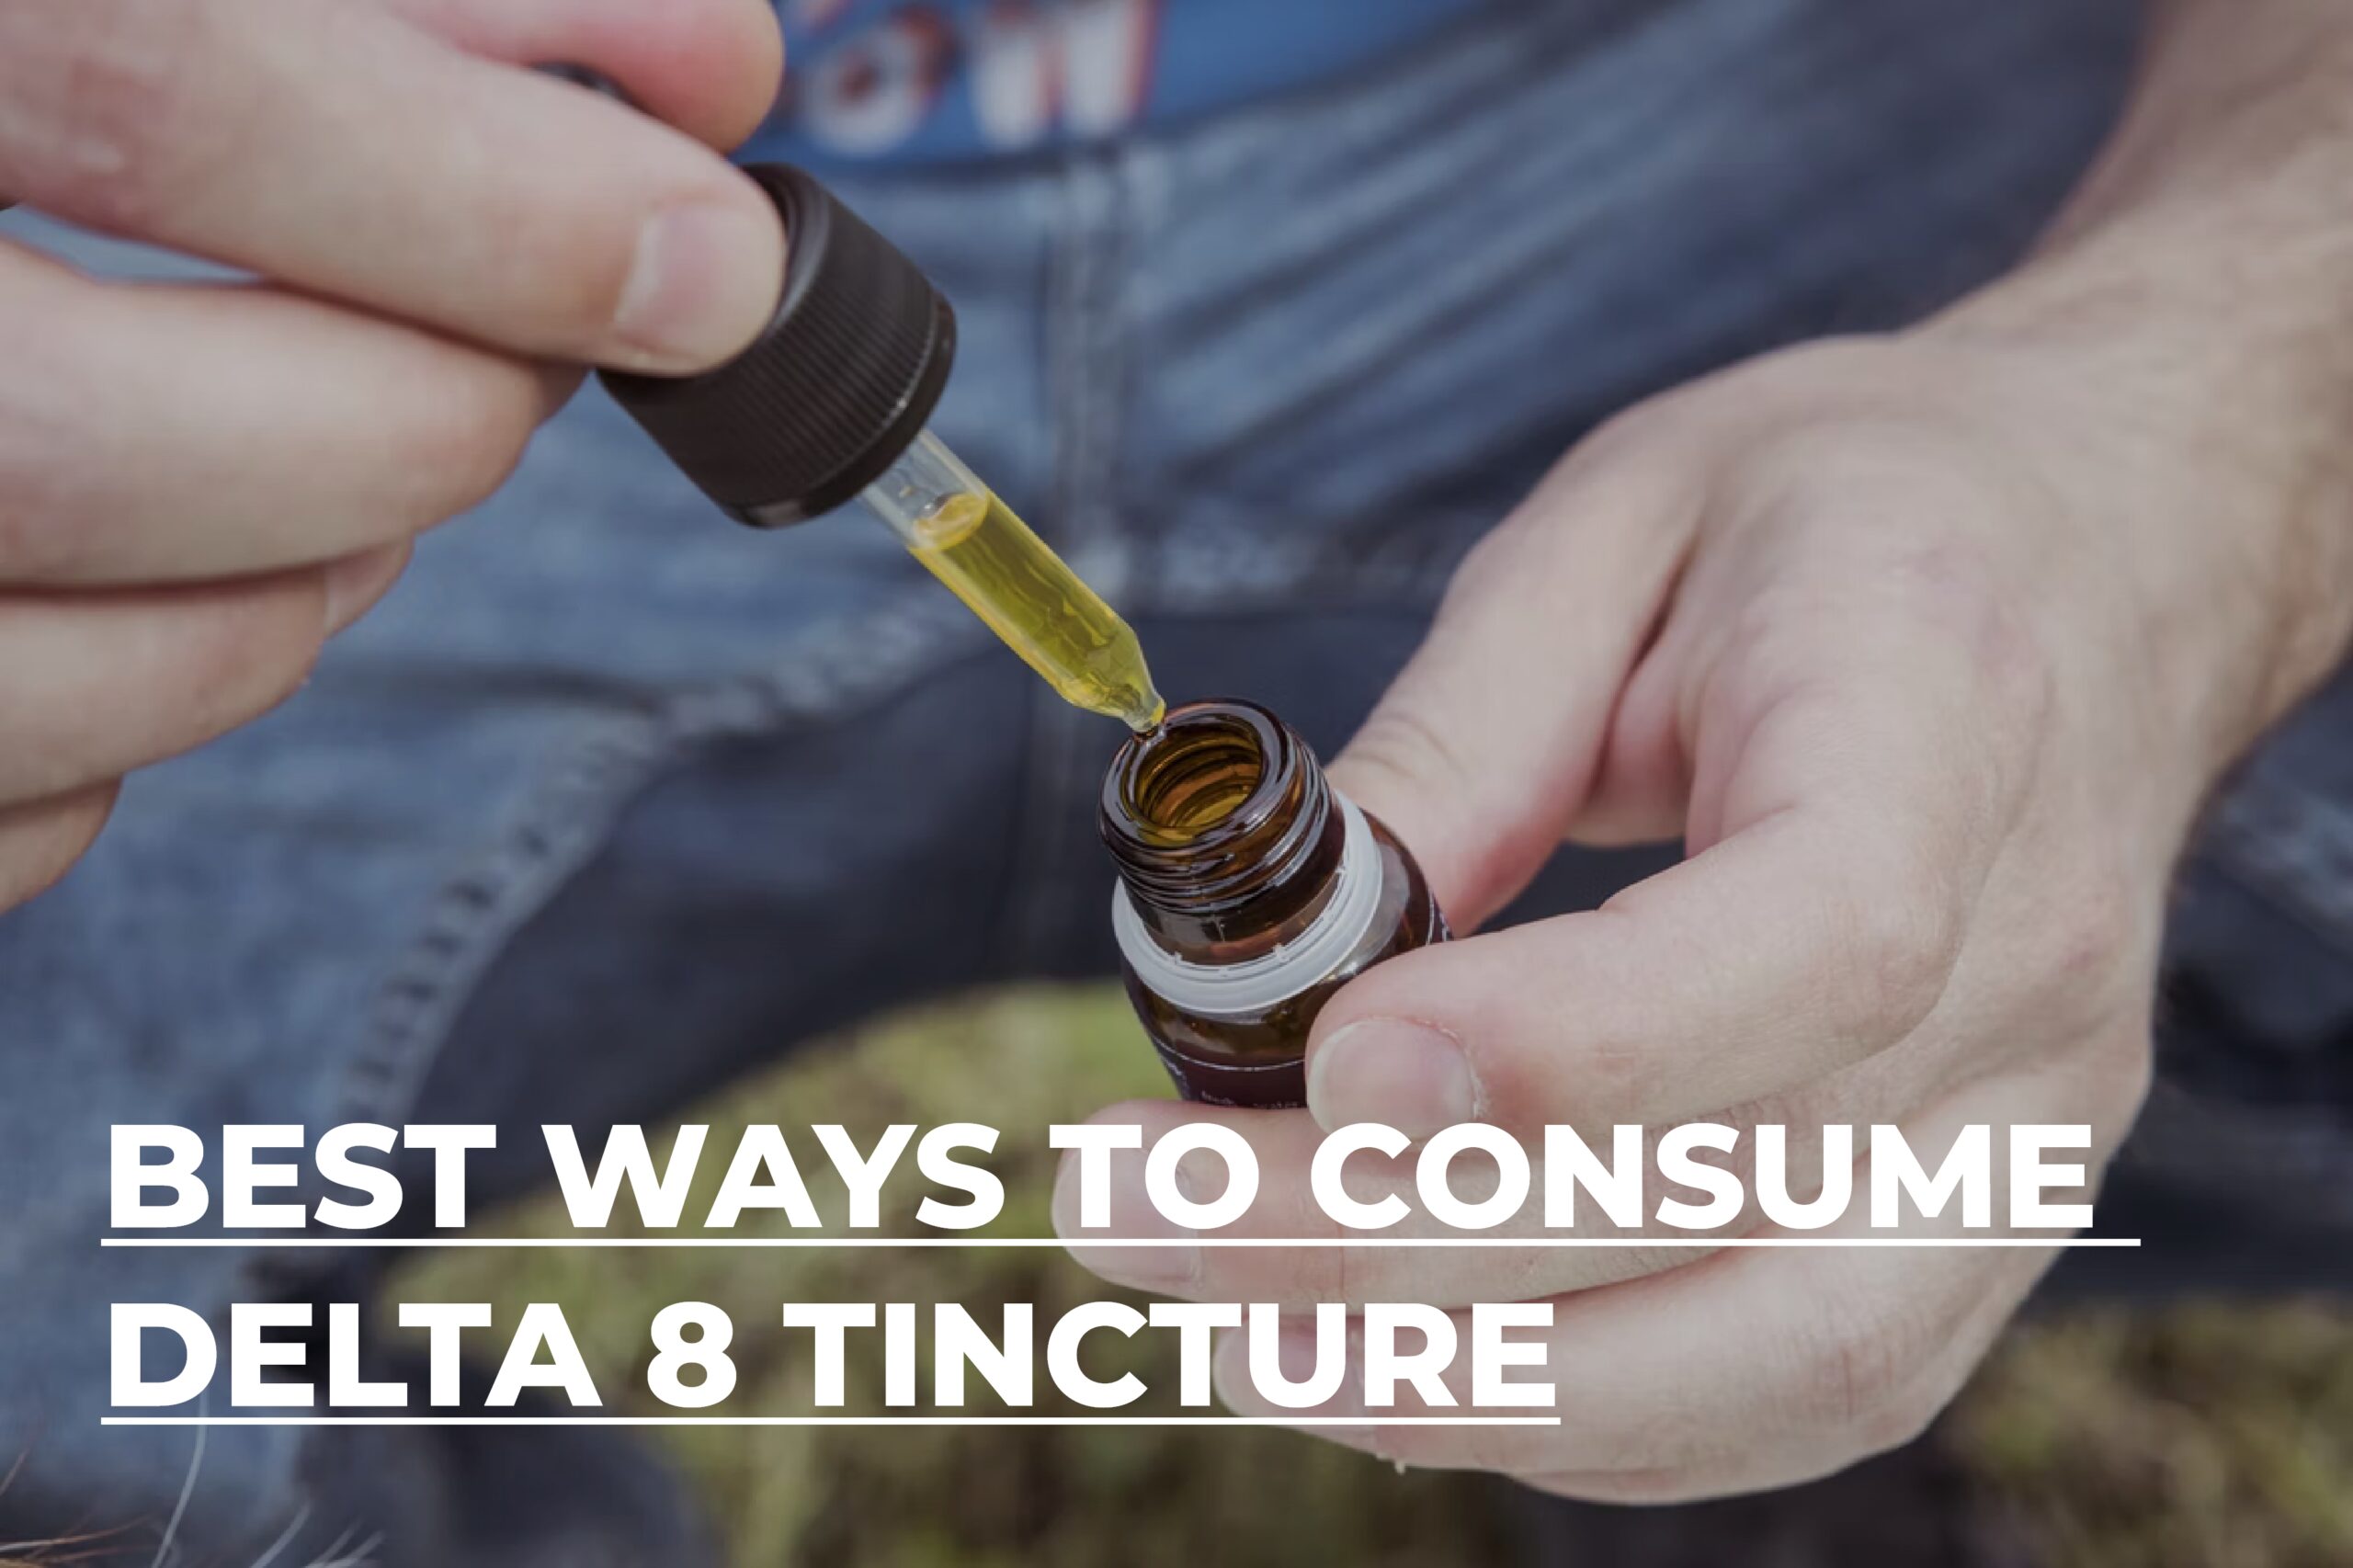 Best Ways to Consume Delta 8 Tincture - User's Guide - BudPop